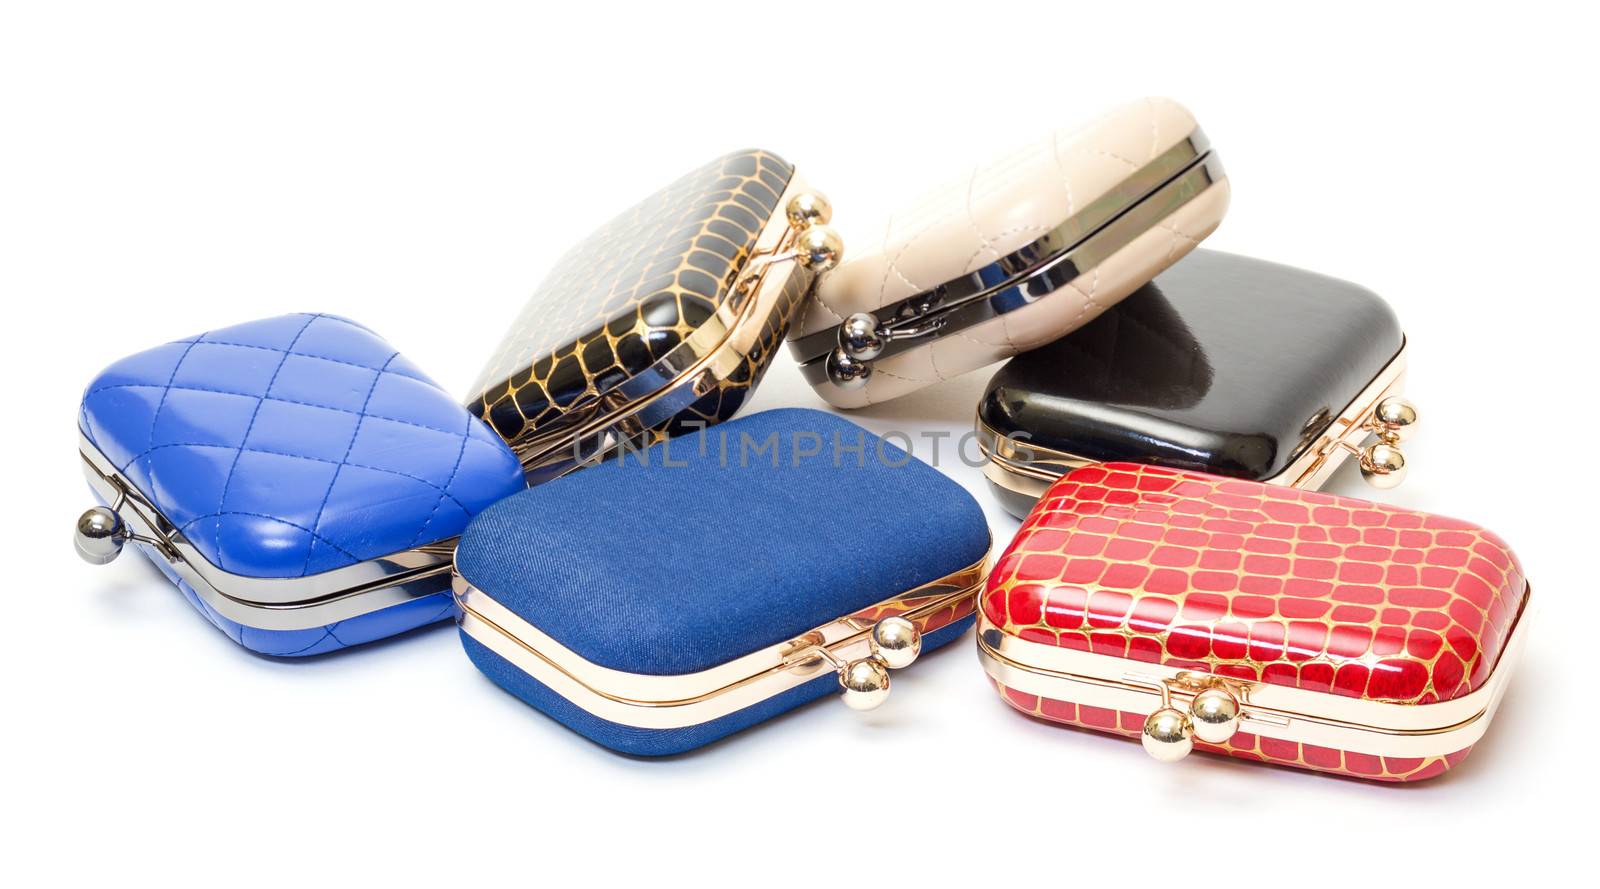 Set of fashionable female handbags by Discovod